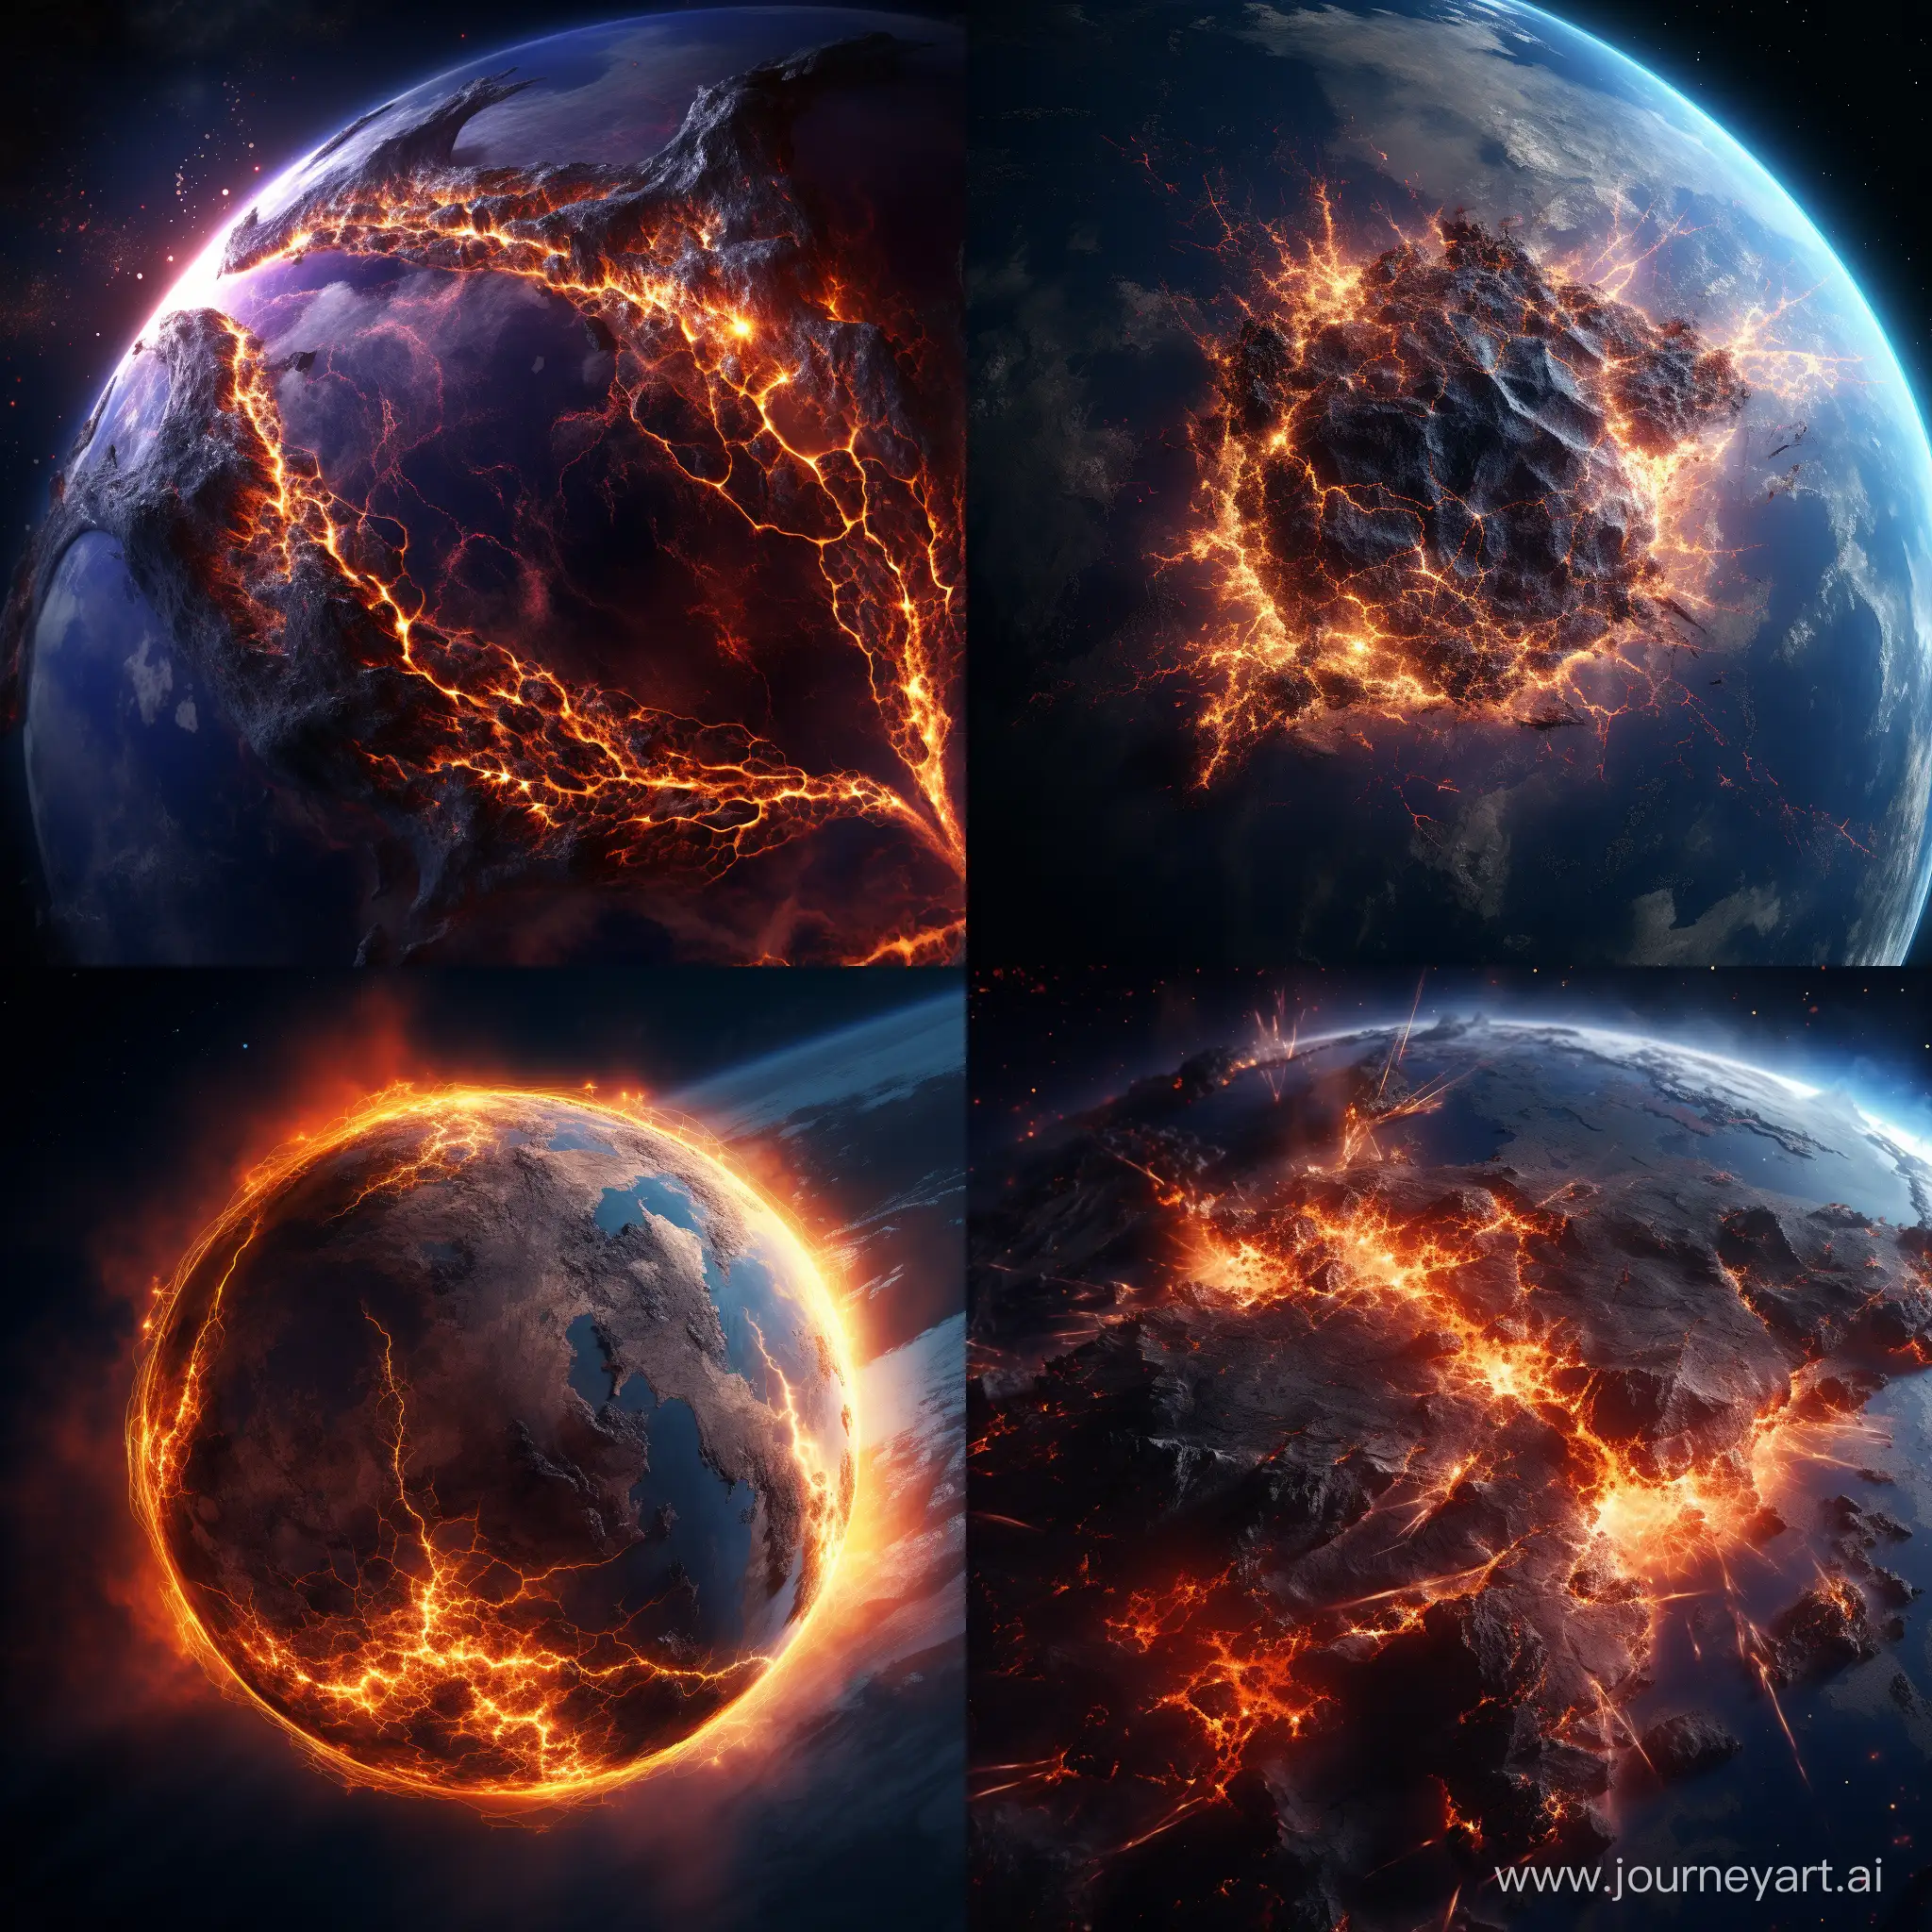 Planet Earth pictured from space, taking up 30% of  the image area in the centre of image, showning small visible cracks from internal pressure with glowing magma visible in the cracks, cinematic 4K

